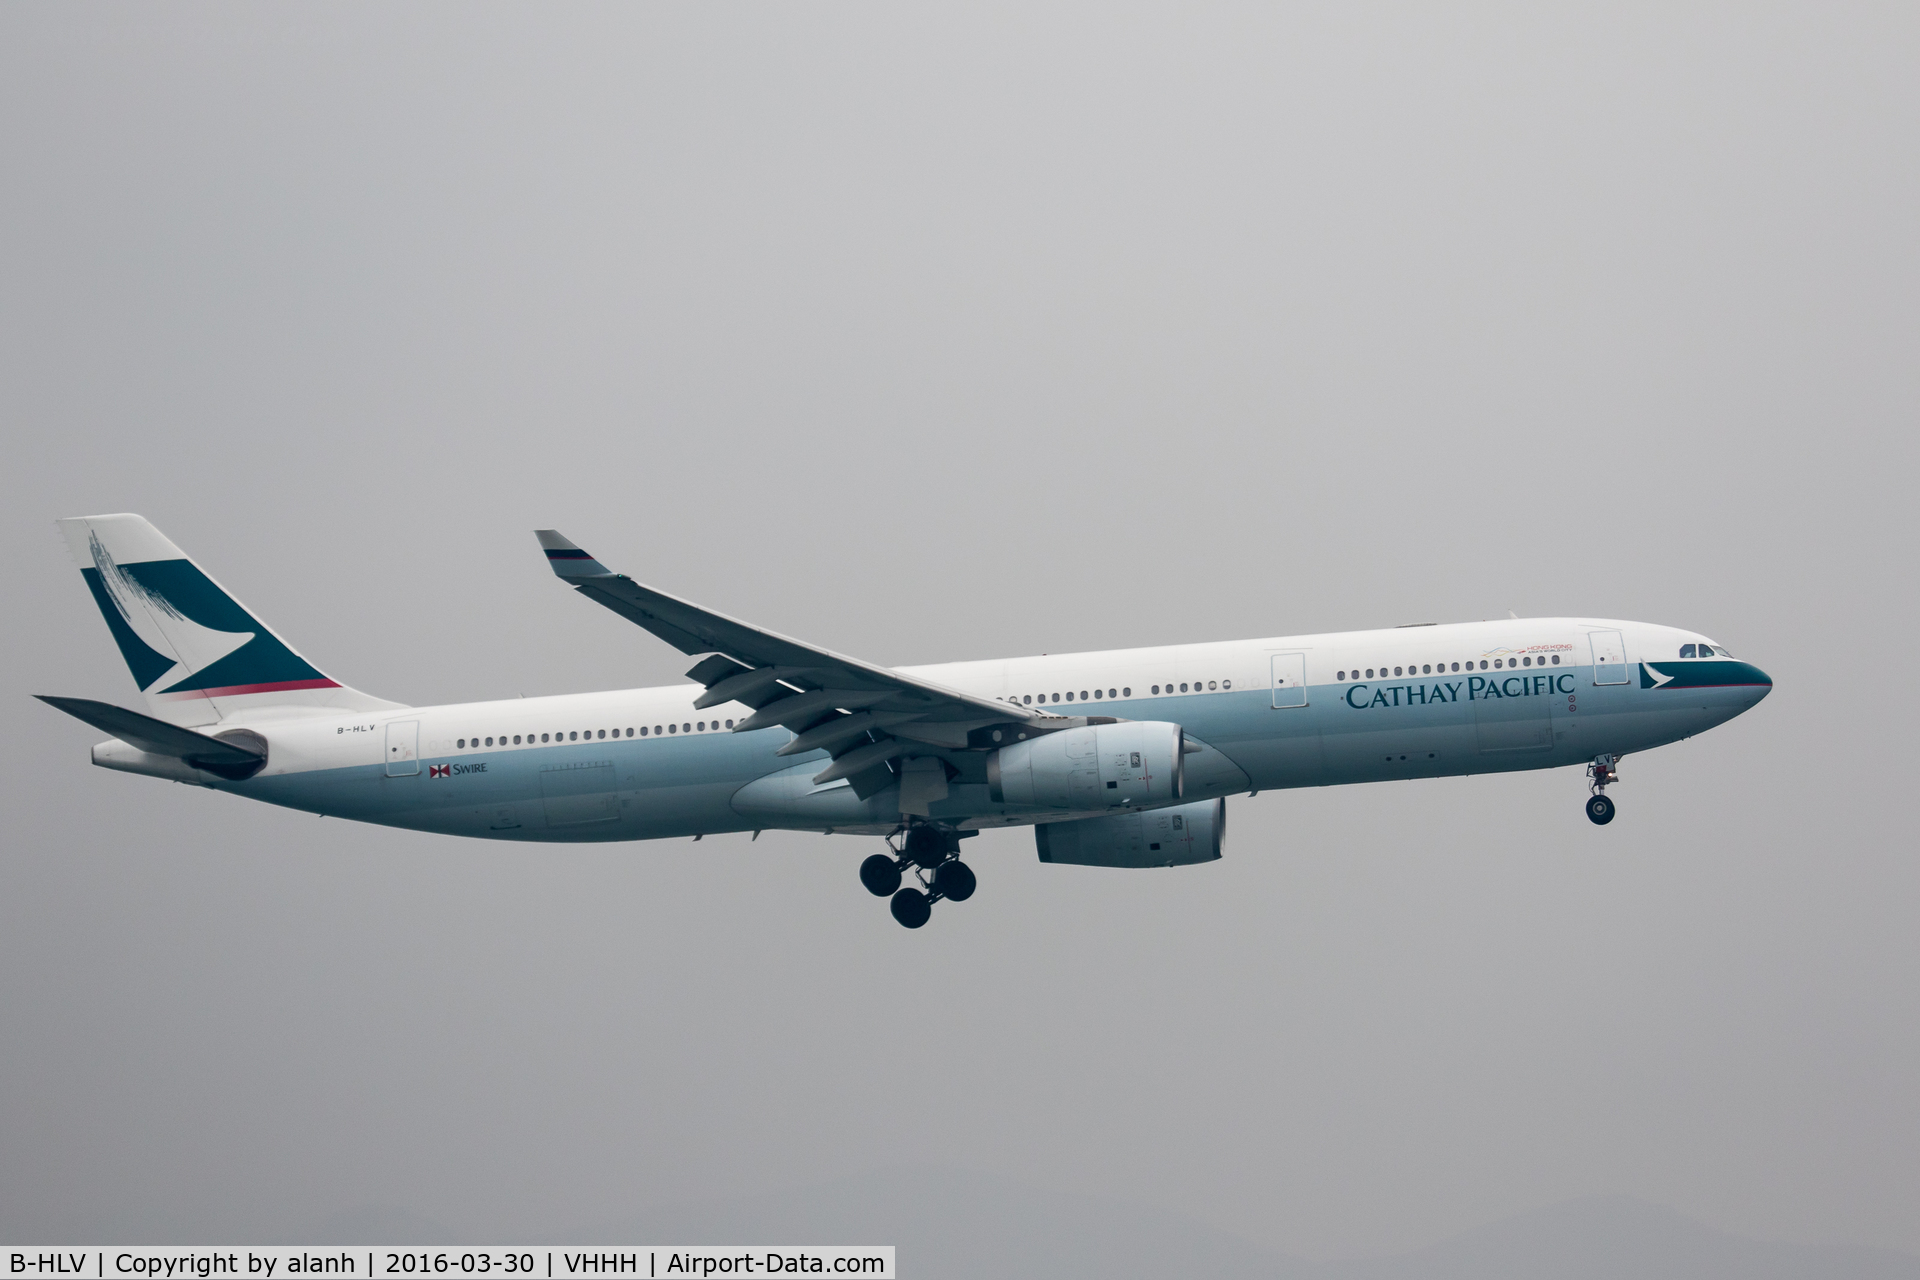 B-HLV, 2003 Airbus A330-343 C/N 548, On finals for Hong Kong, inbound from Singapore Changi